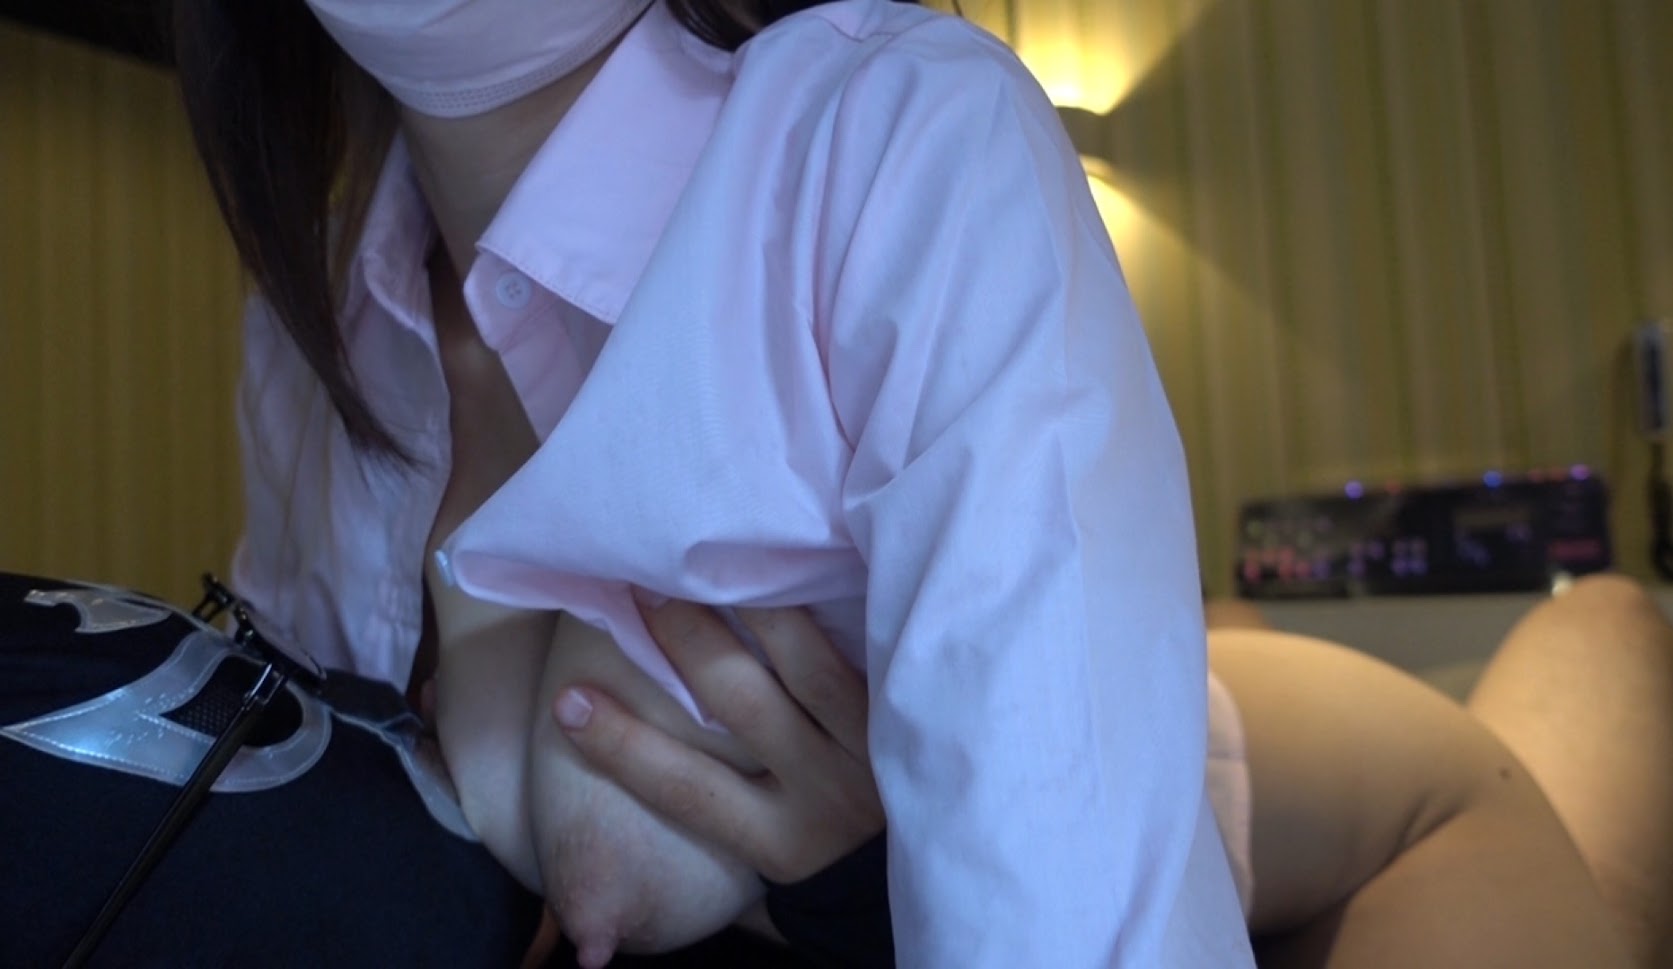 FC2-PPV 2368488 Ria Chan Constriction On The Ultimate Thin Waist Gonzo With Uniform Costume Ecchi Handjob Launch - SS Server